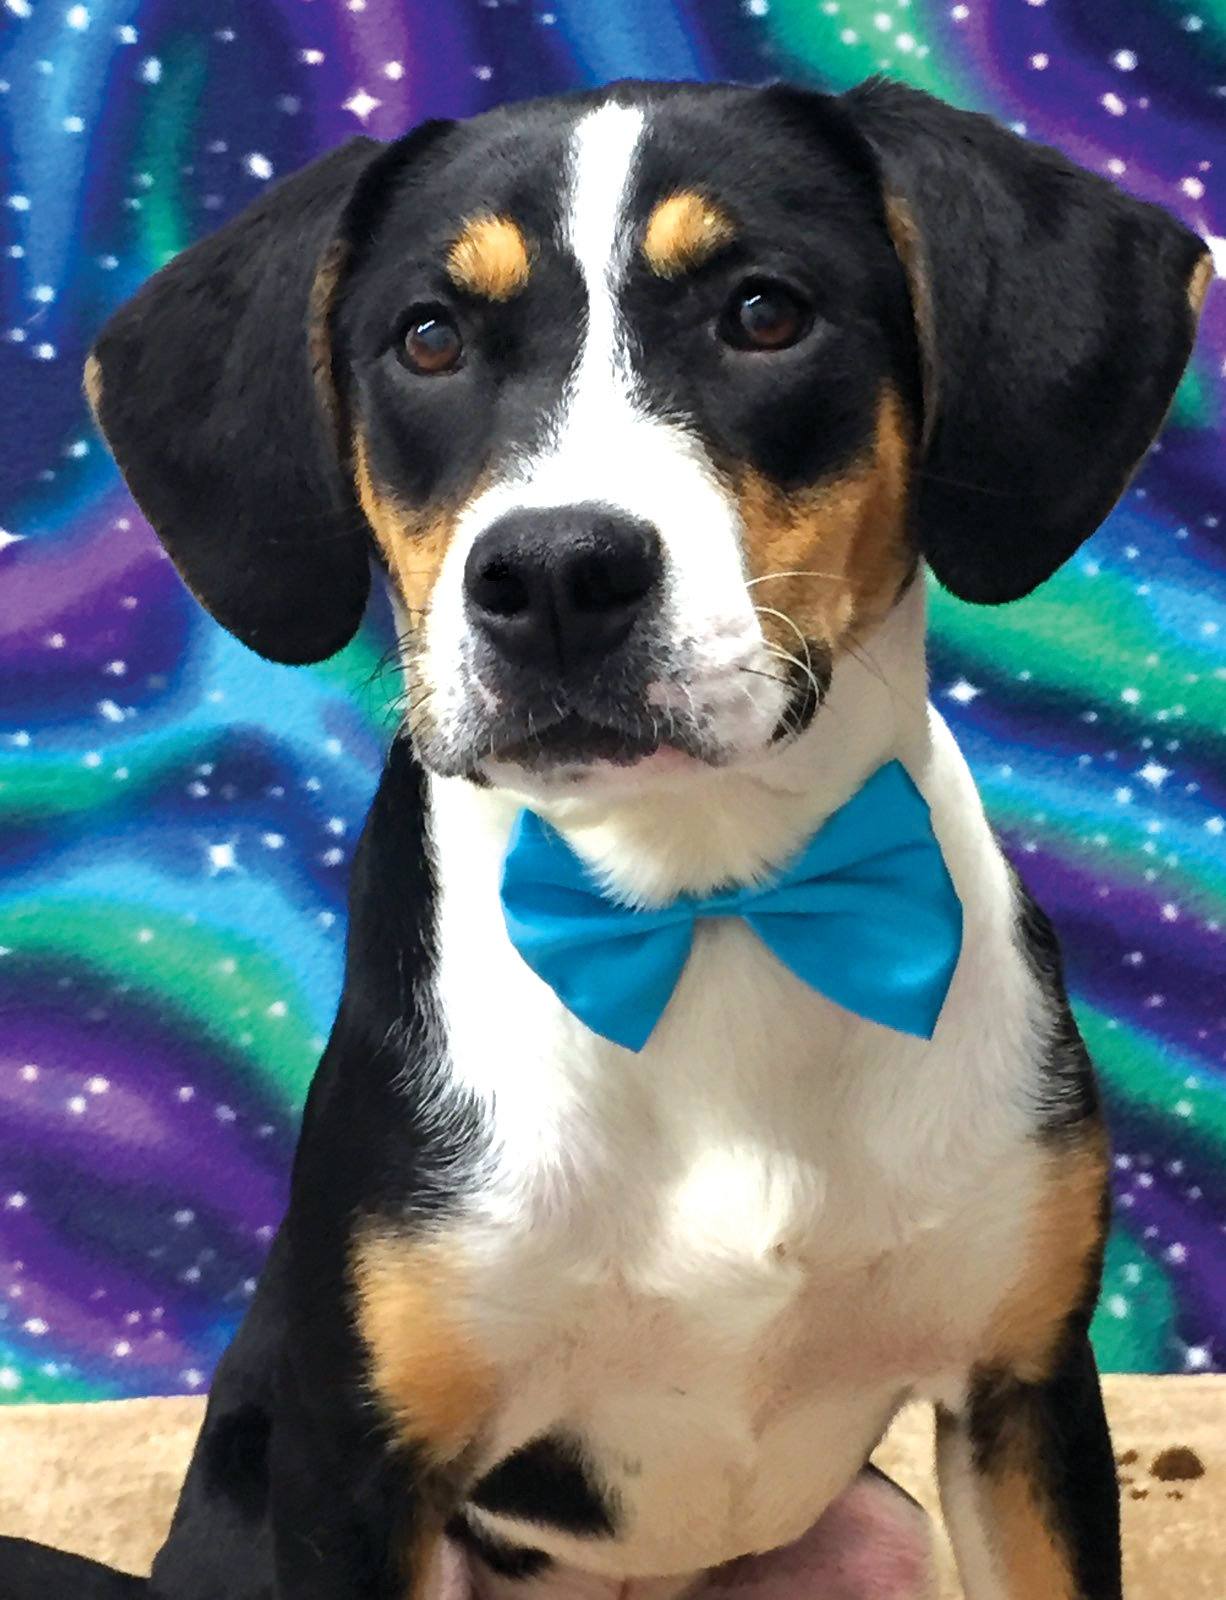 Dash is a 6-month-old hound mix. He is wonderful with children and other dogs. He is active, friendly and playful. Dash is an affectionate boy who loves people and enjoys any kind of attention. The Sumter SPCA is located at 1140 S. Guignard Drive, (803) 773-9292, and is open 11 a.m. to 5:30 p.m. every day except Wednesday and Sunday. Visit the website at www.sumterscspca.com.